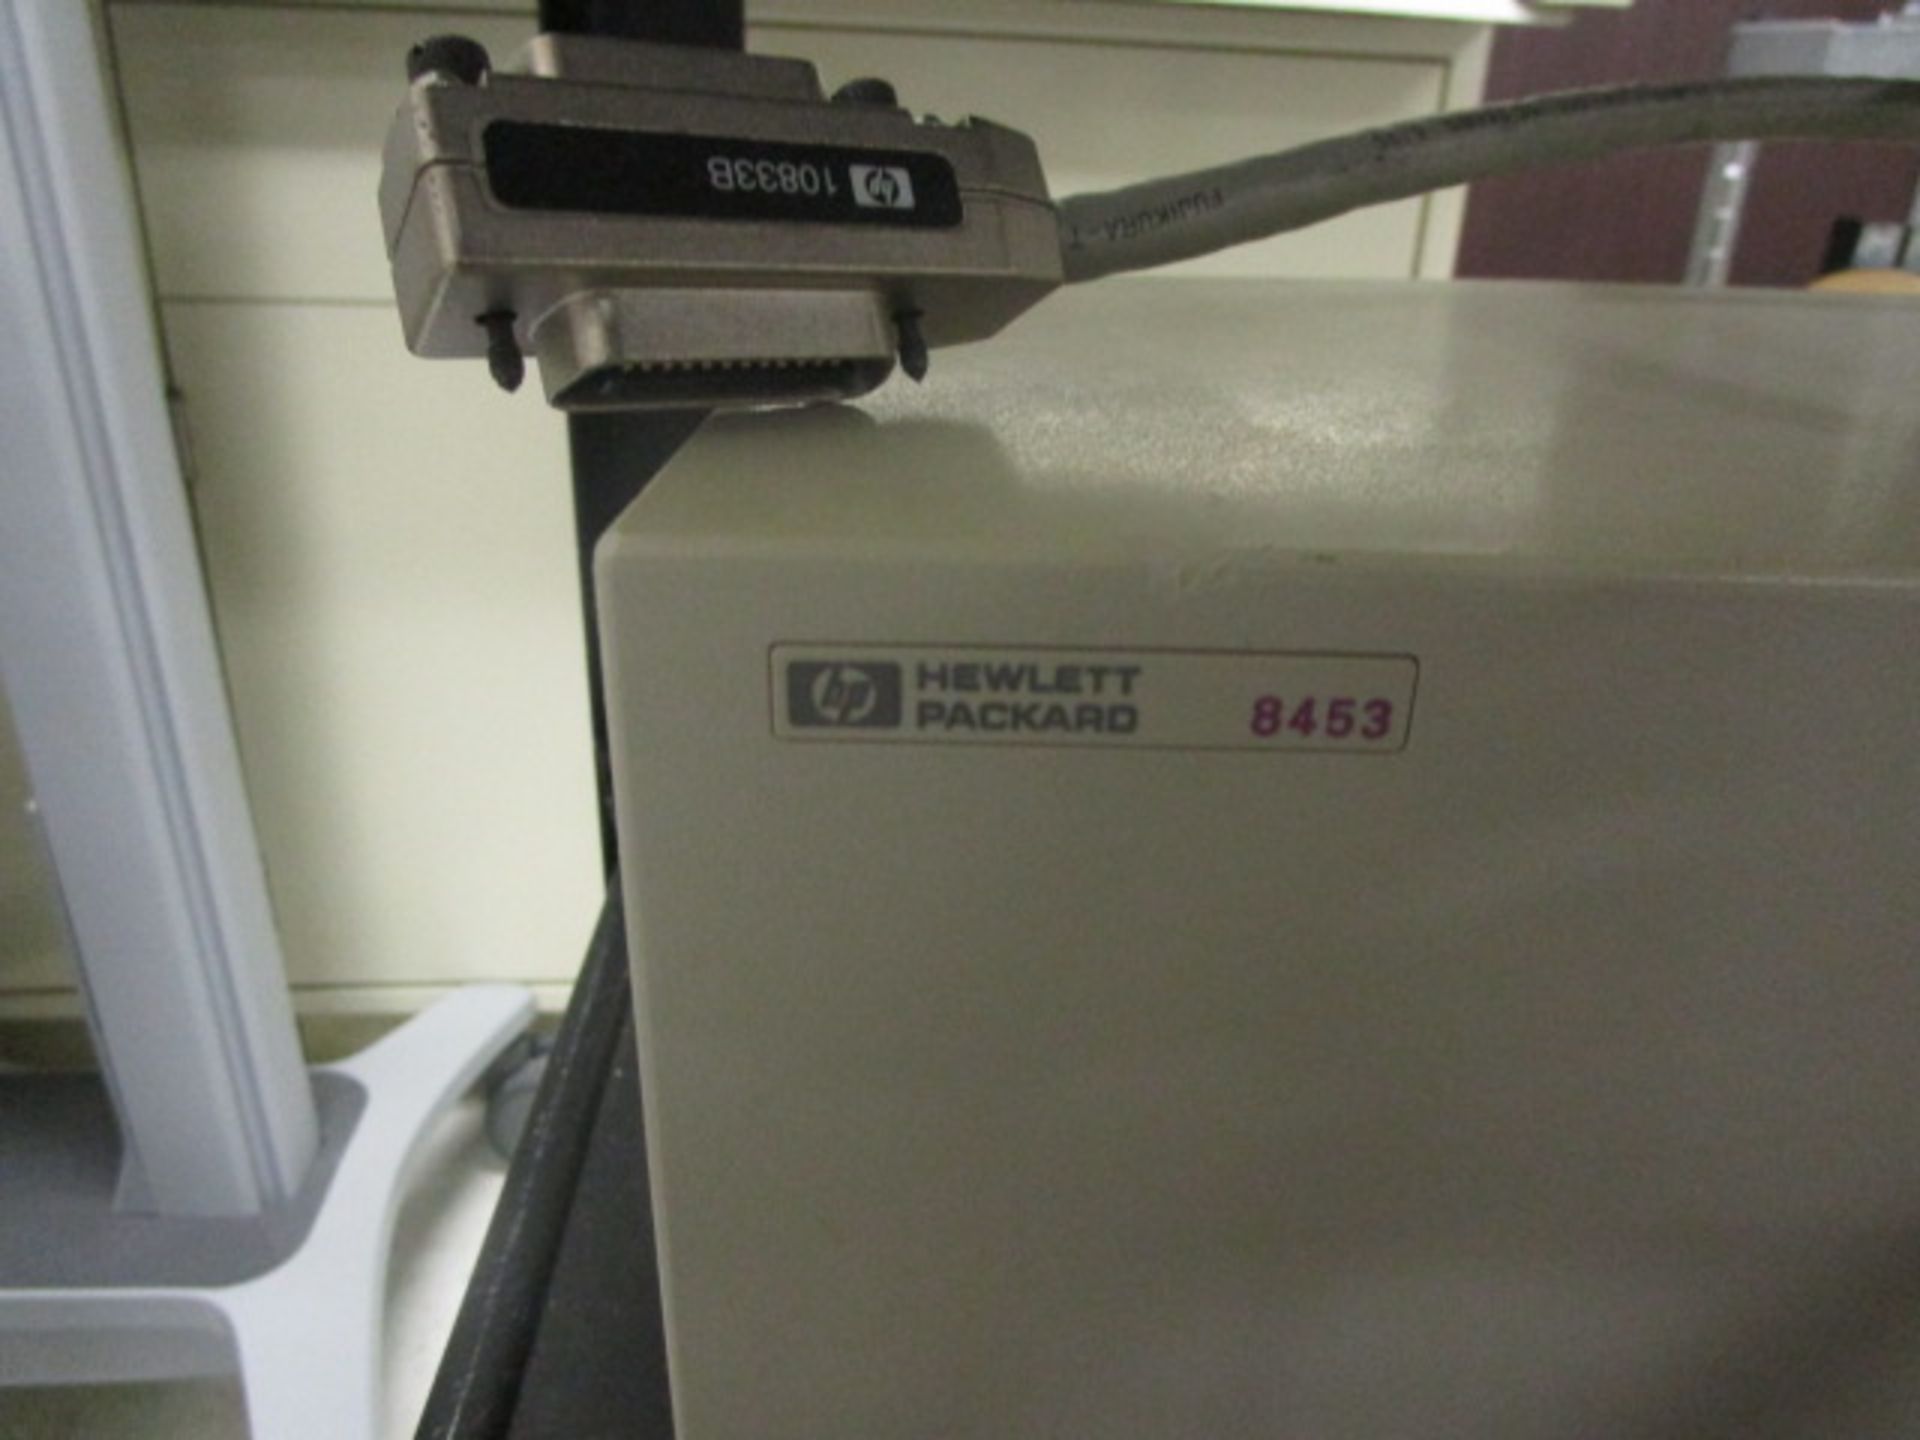 Hewlett Packard 8453 UV-Vis Spectra Photometer with grip cable. - Image 2 of 7